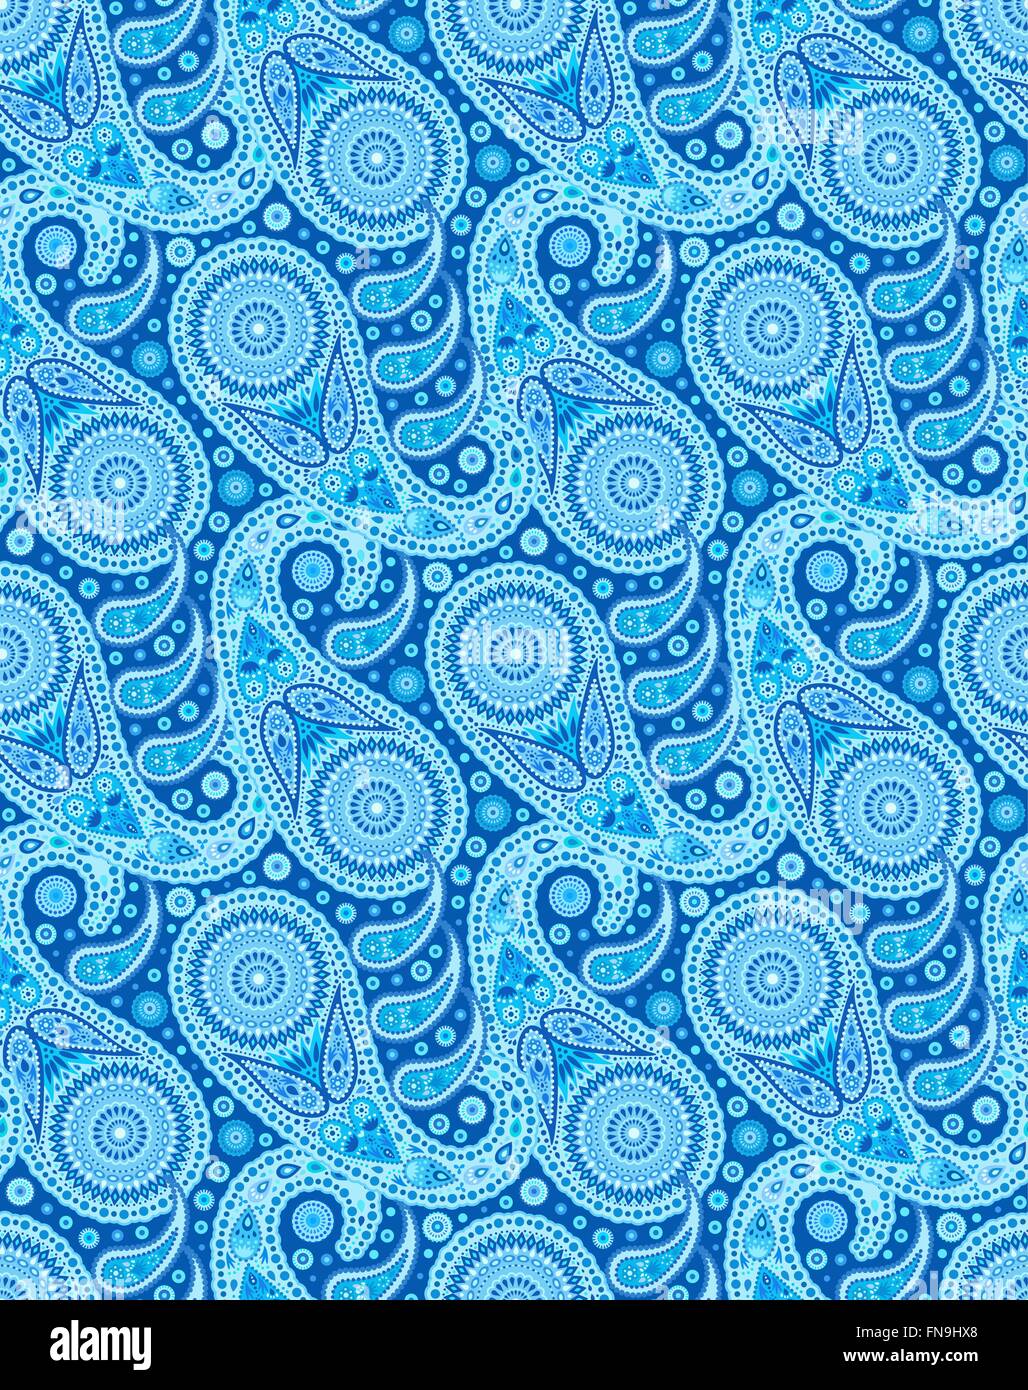 Starry Blue Paisley Pattern Stock Vector